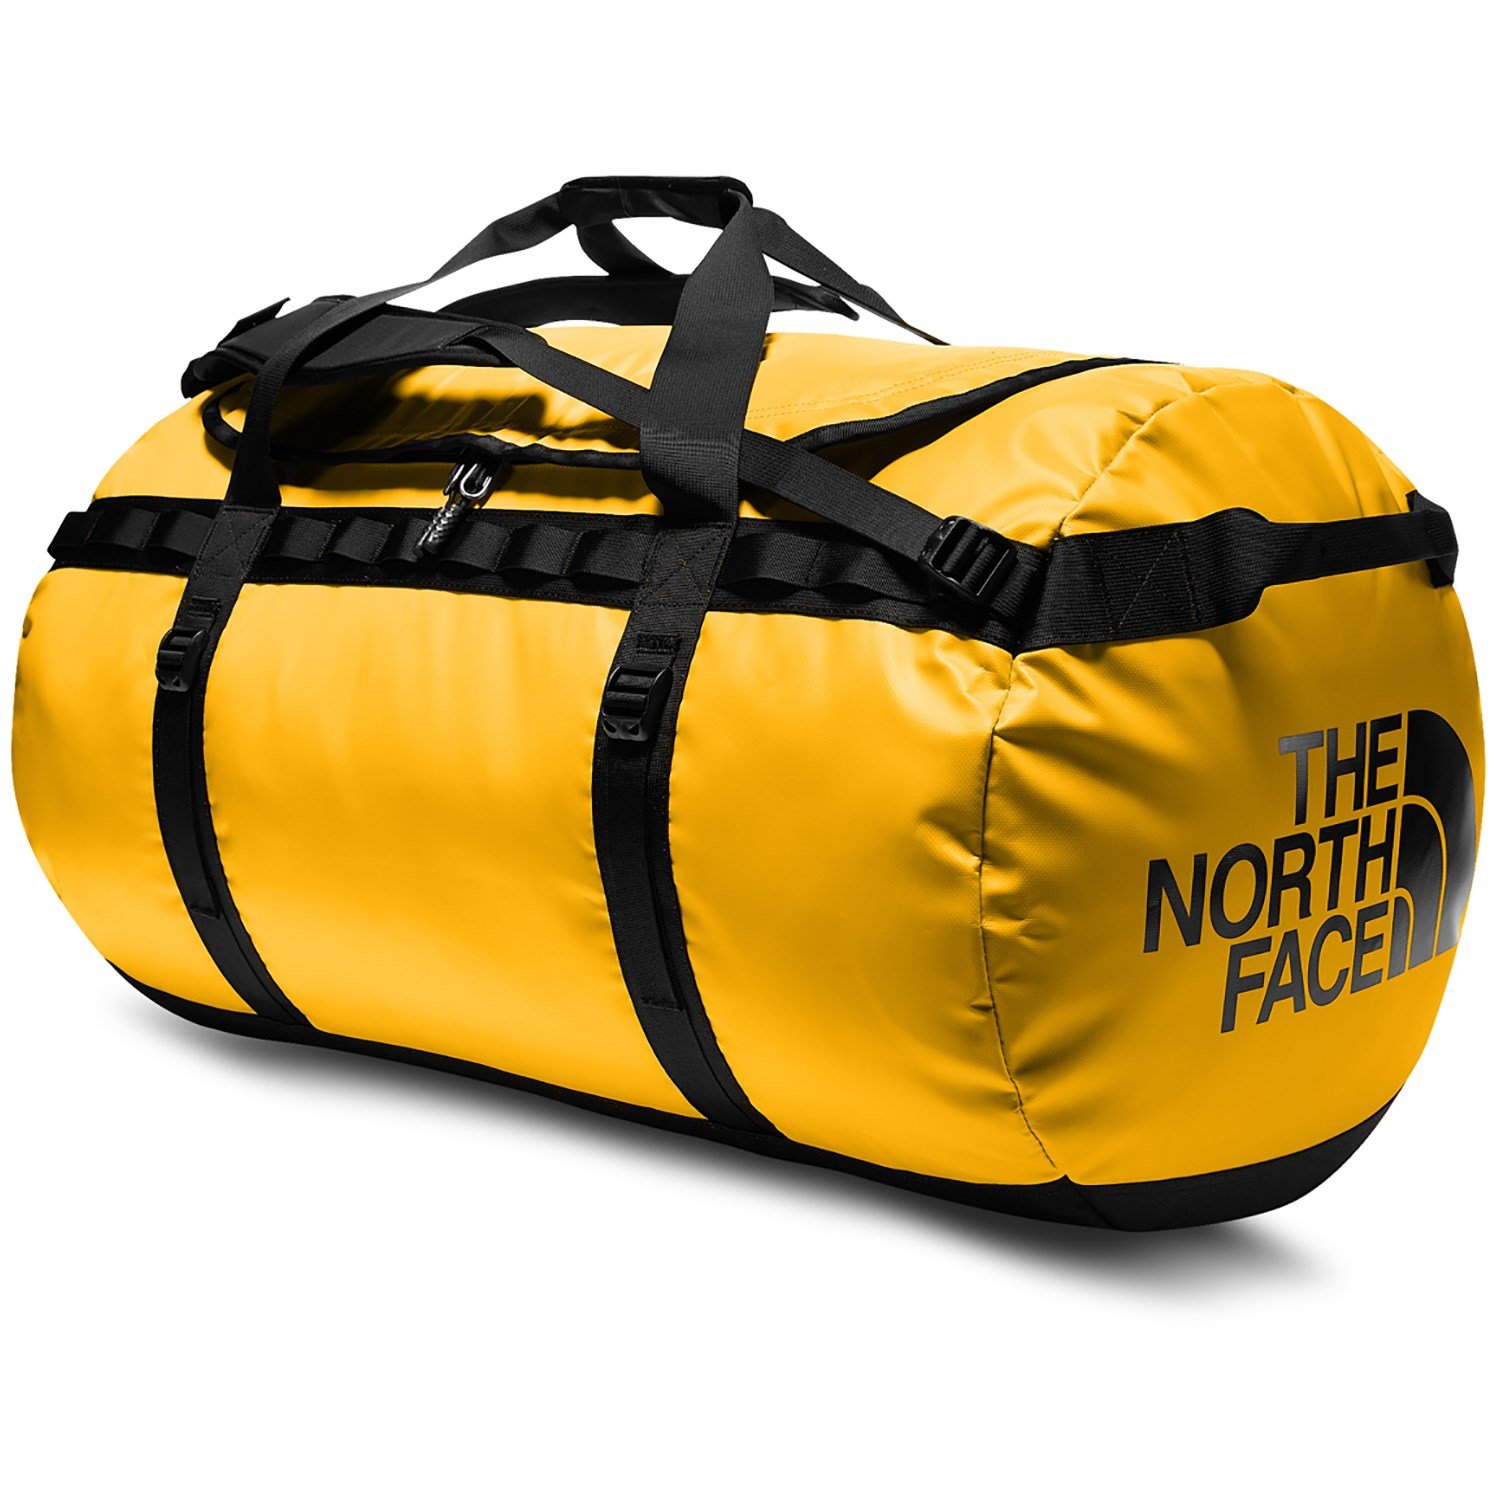 the north face duffel bag